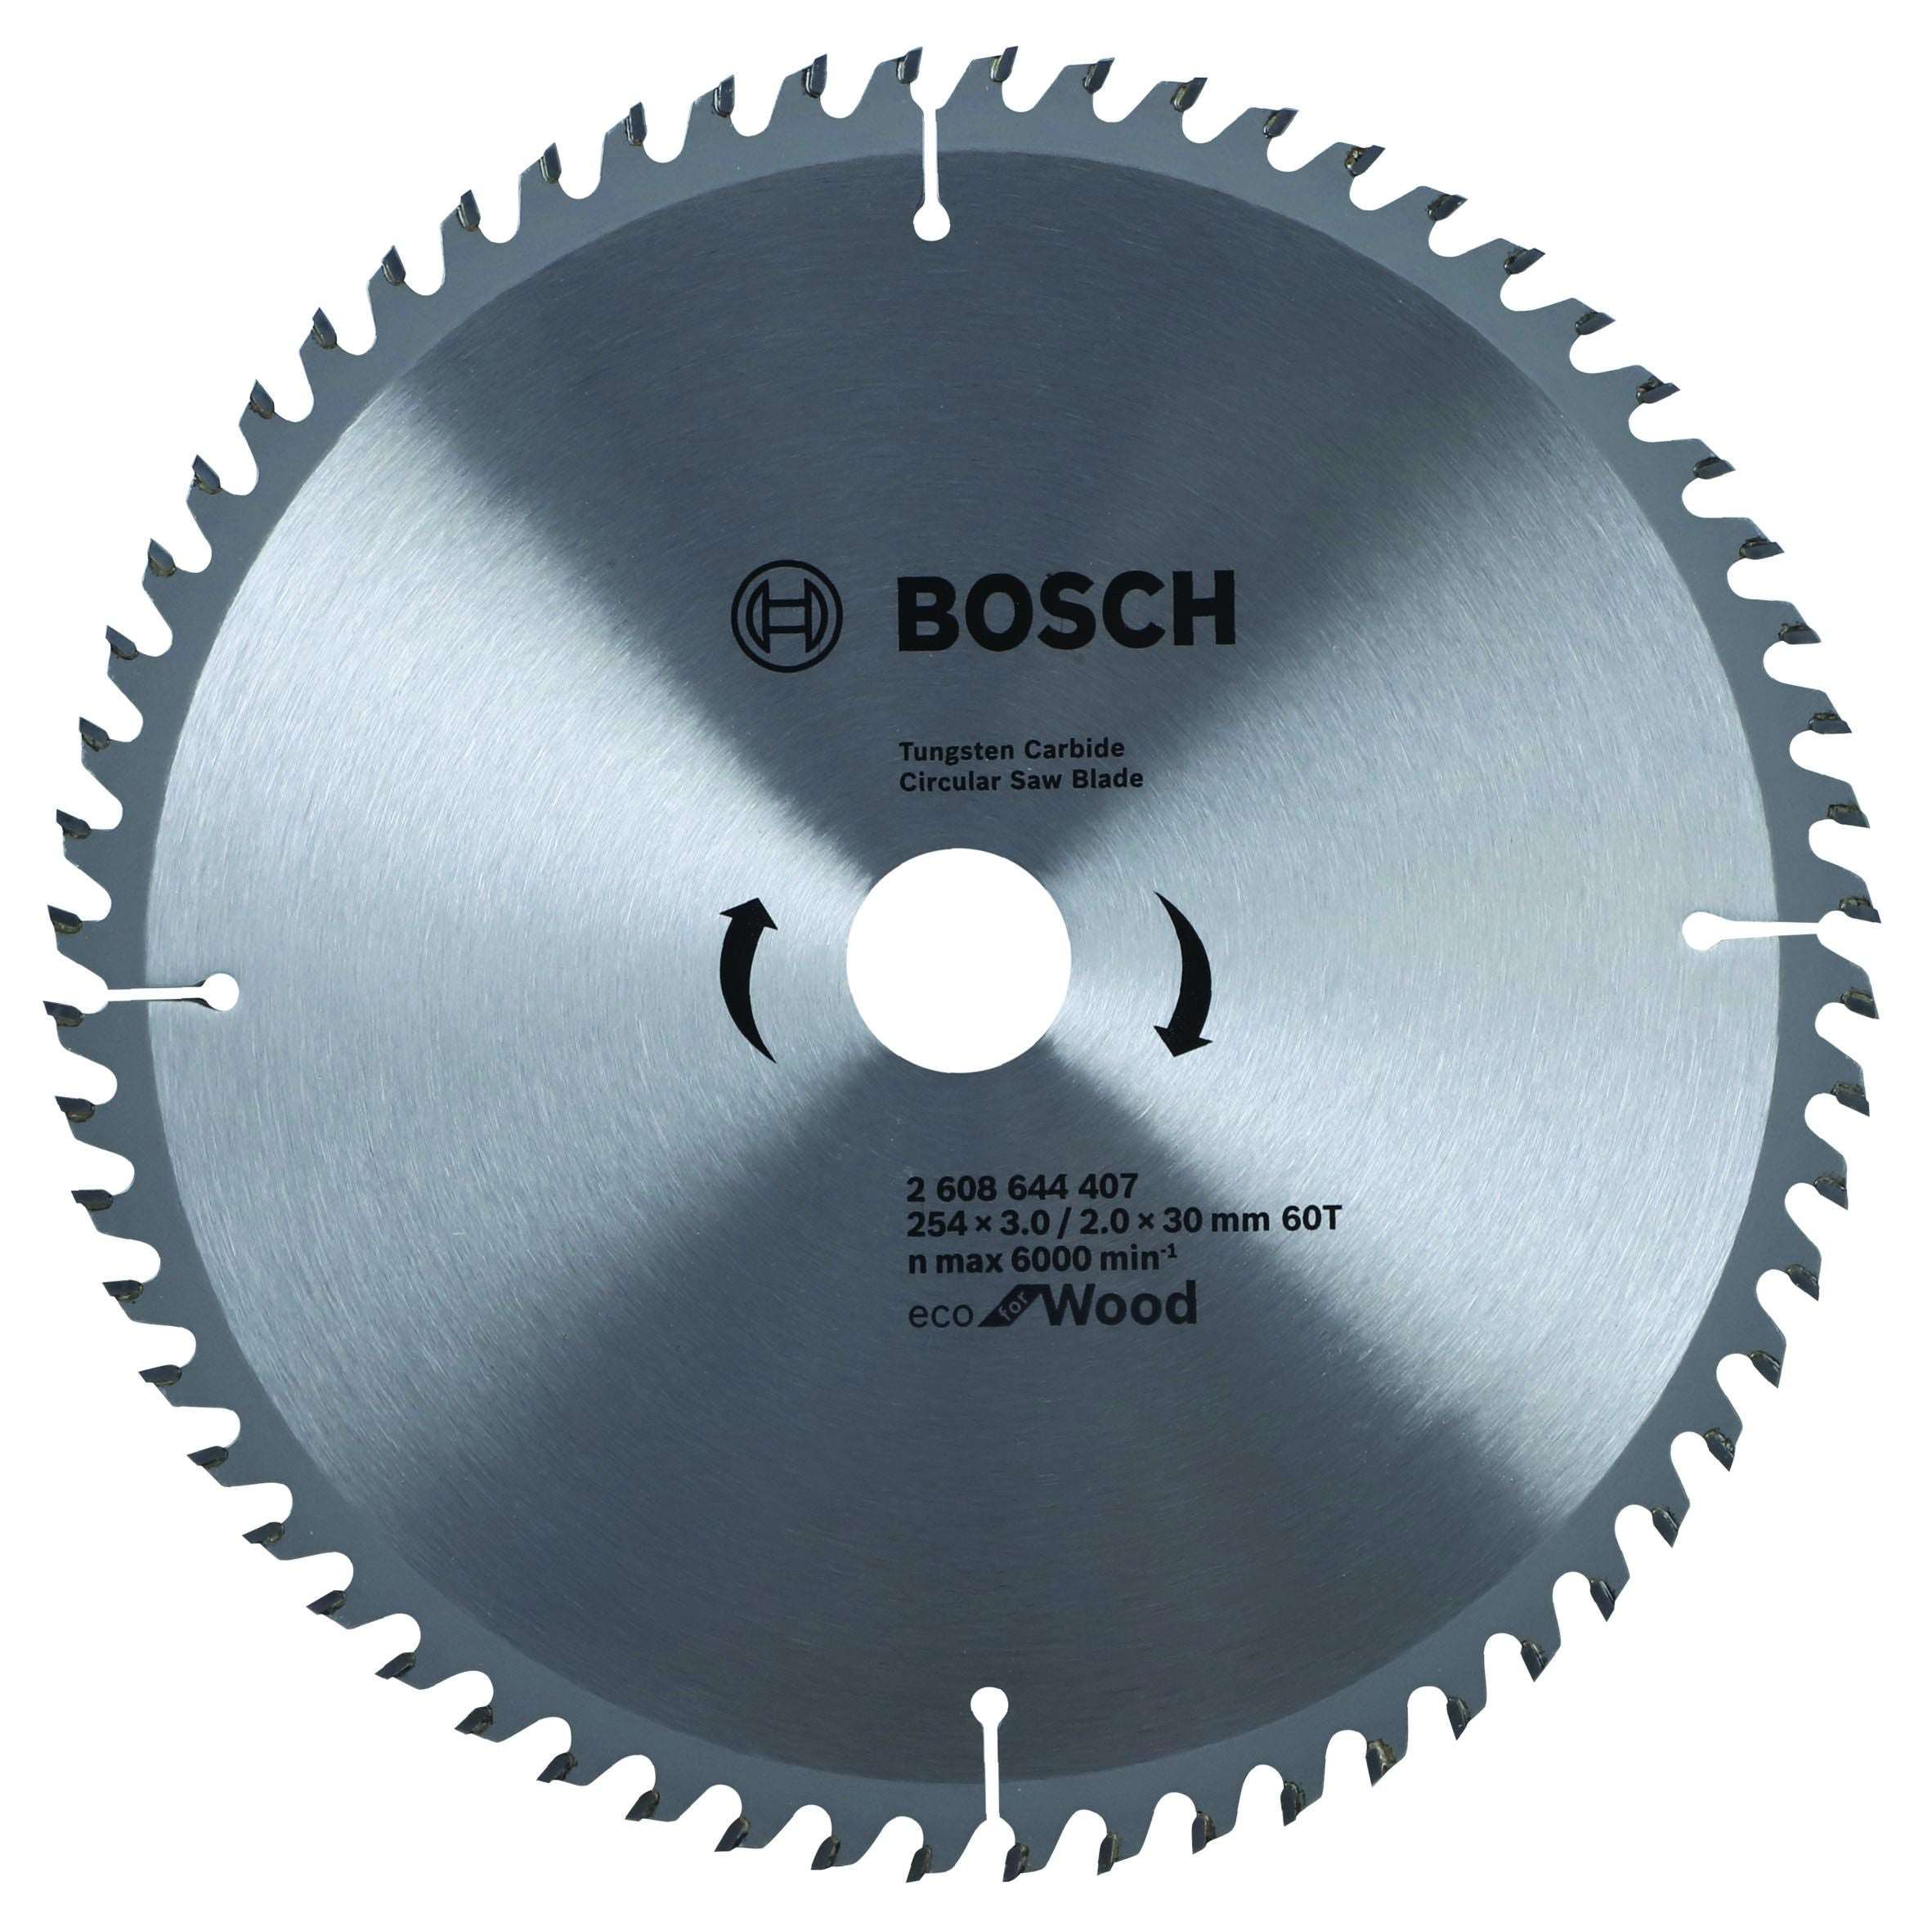 Bosch Circular Saw Blade Eco for wood 254mm 60T 2608644407 Power Tool Services